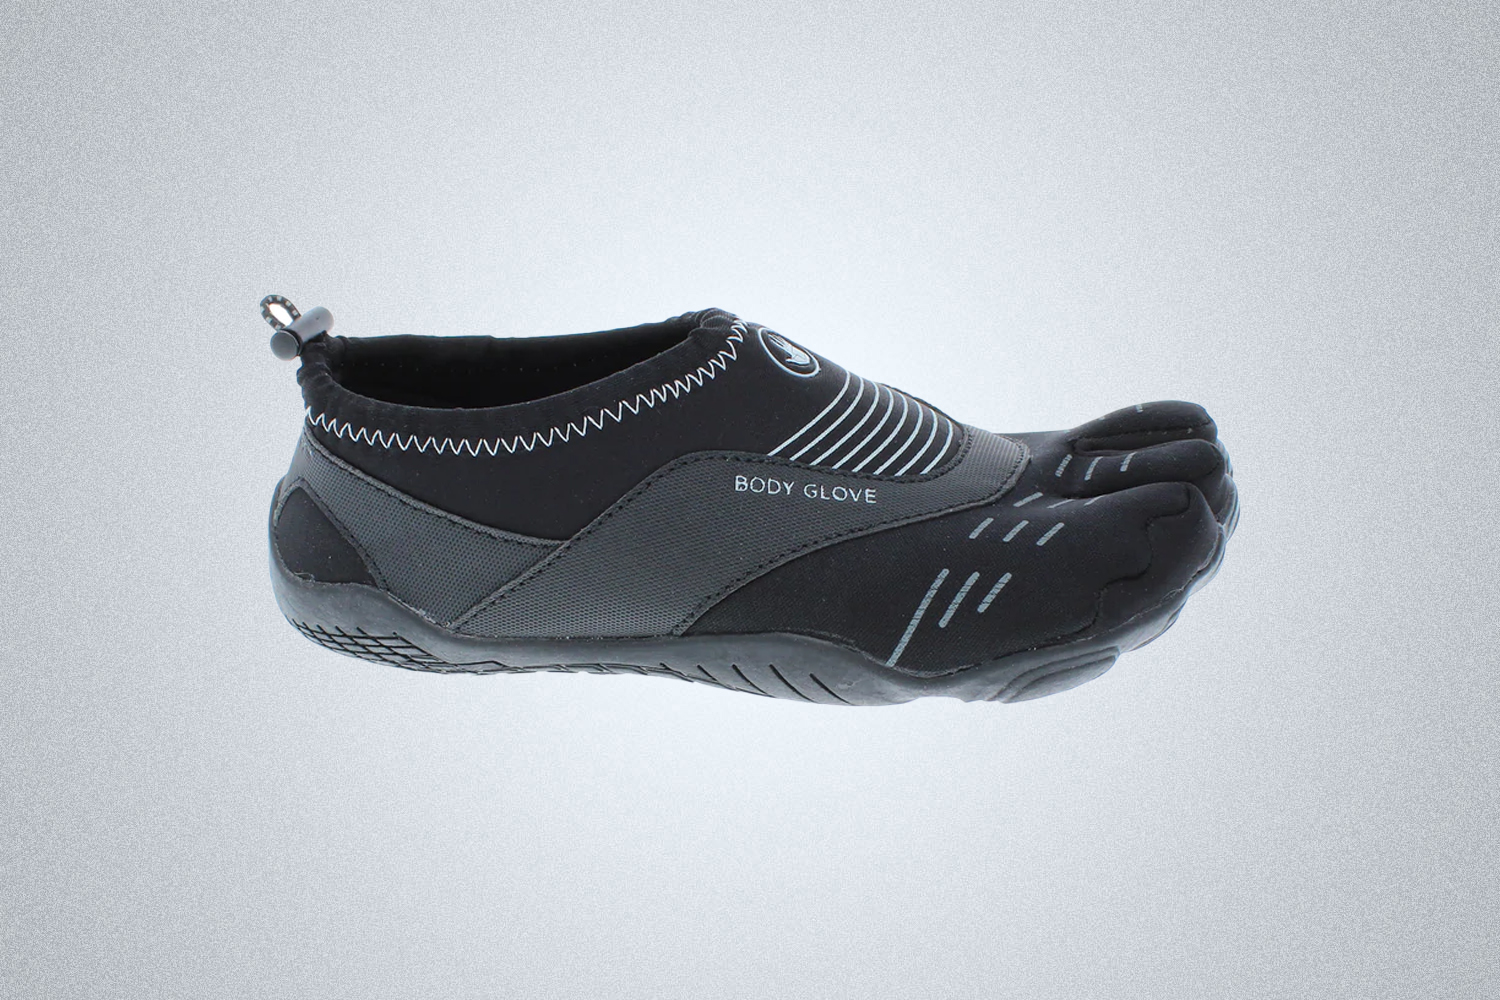 The Bodyglove Barefoot Cinch Water Shoes are the best water shoes for a day at the lake in 2022